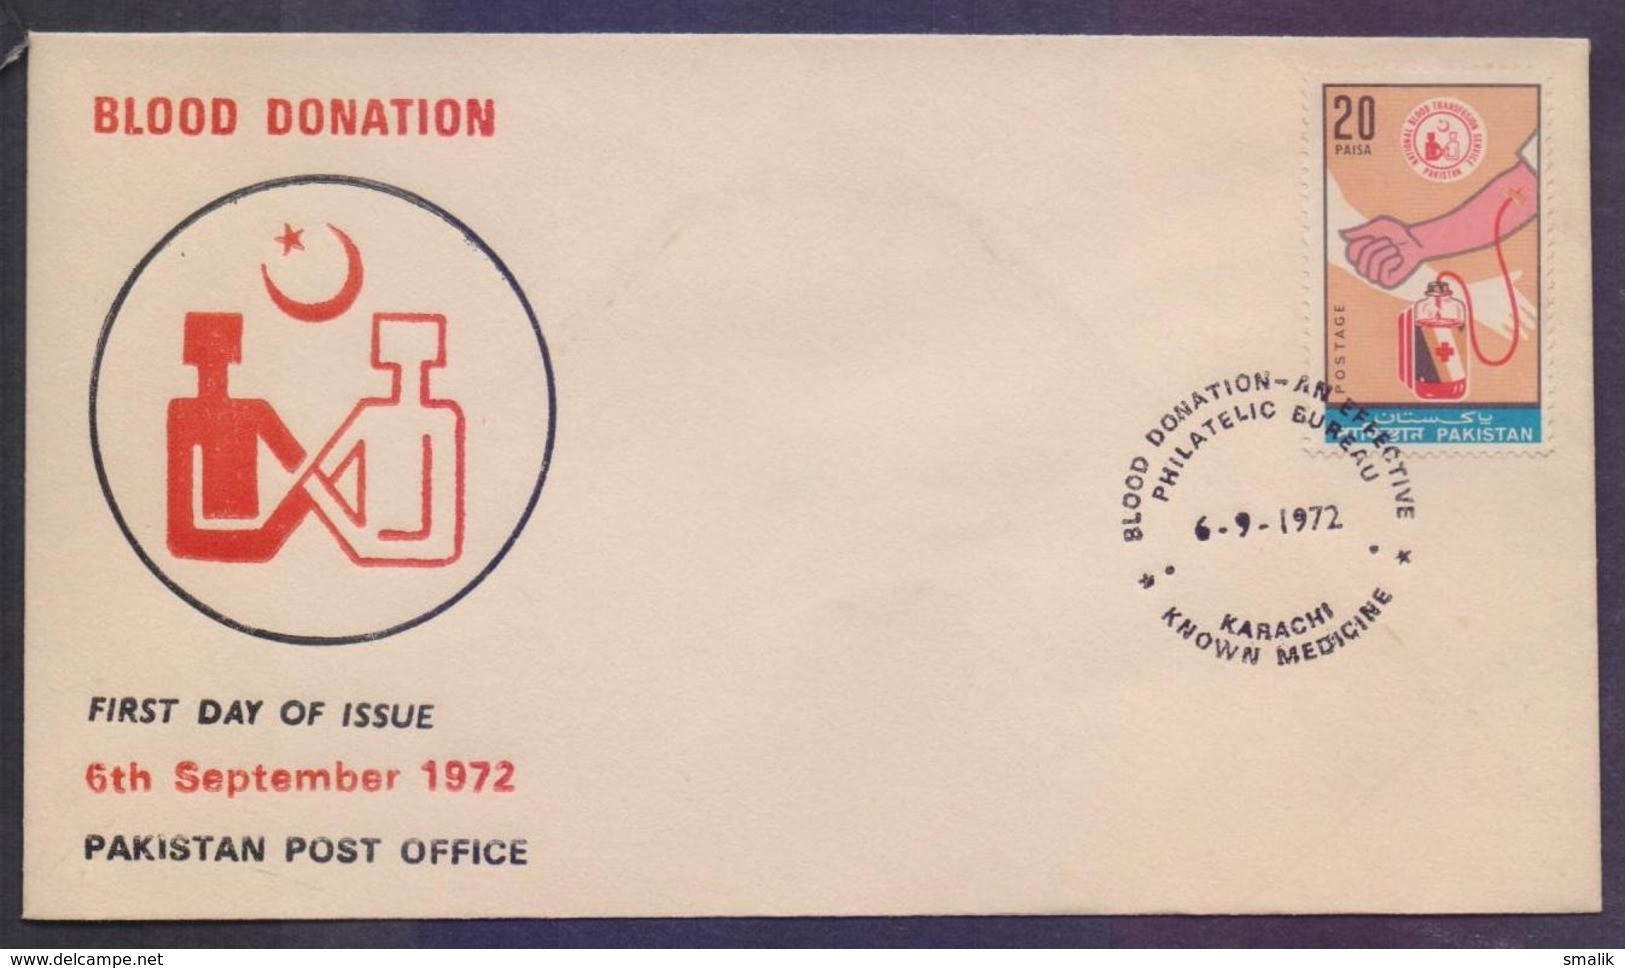 PAKISTAN 1972 FDC - BLOOD DONATION, National Blood Transfution, Health, First Day Cover - Pakistan